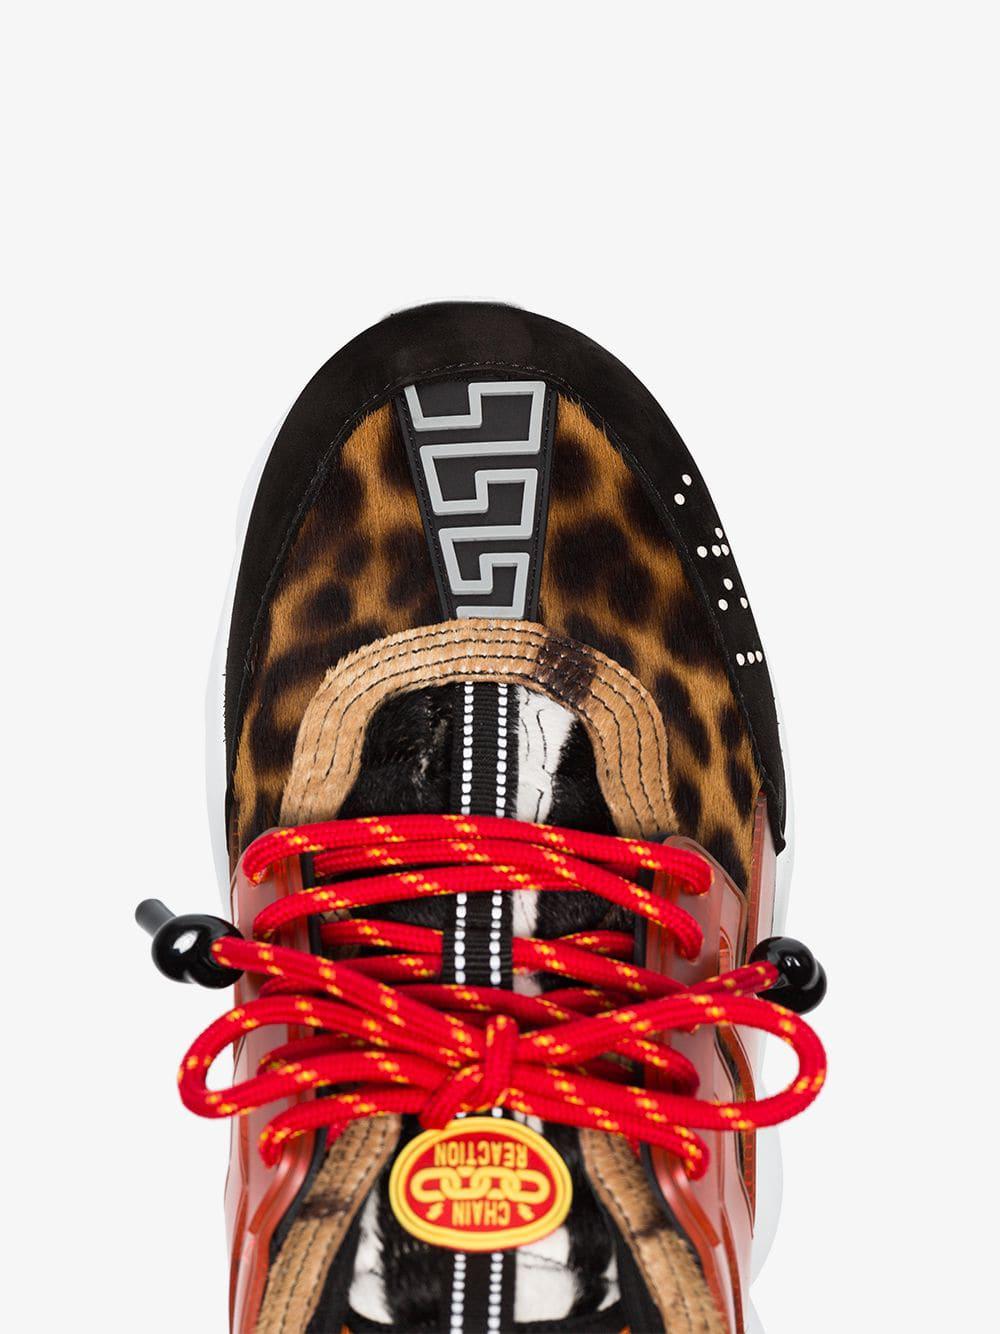 versace shoes cheetah,OFF 80%,www.concordehotels.com.tr